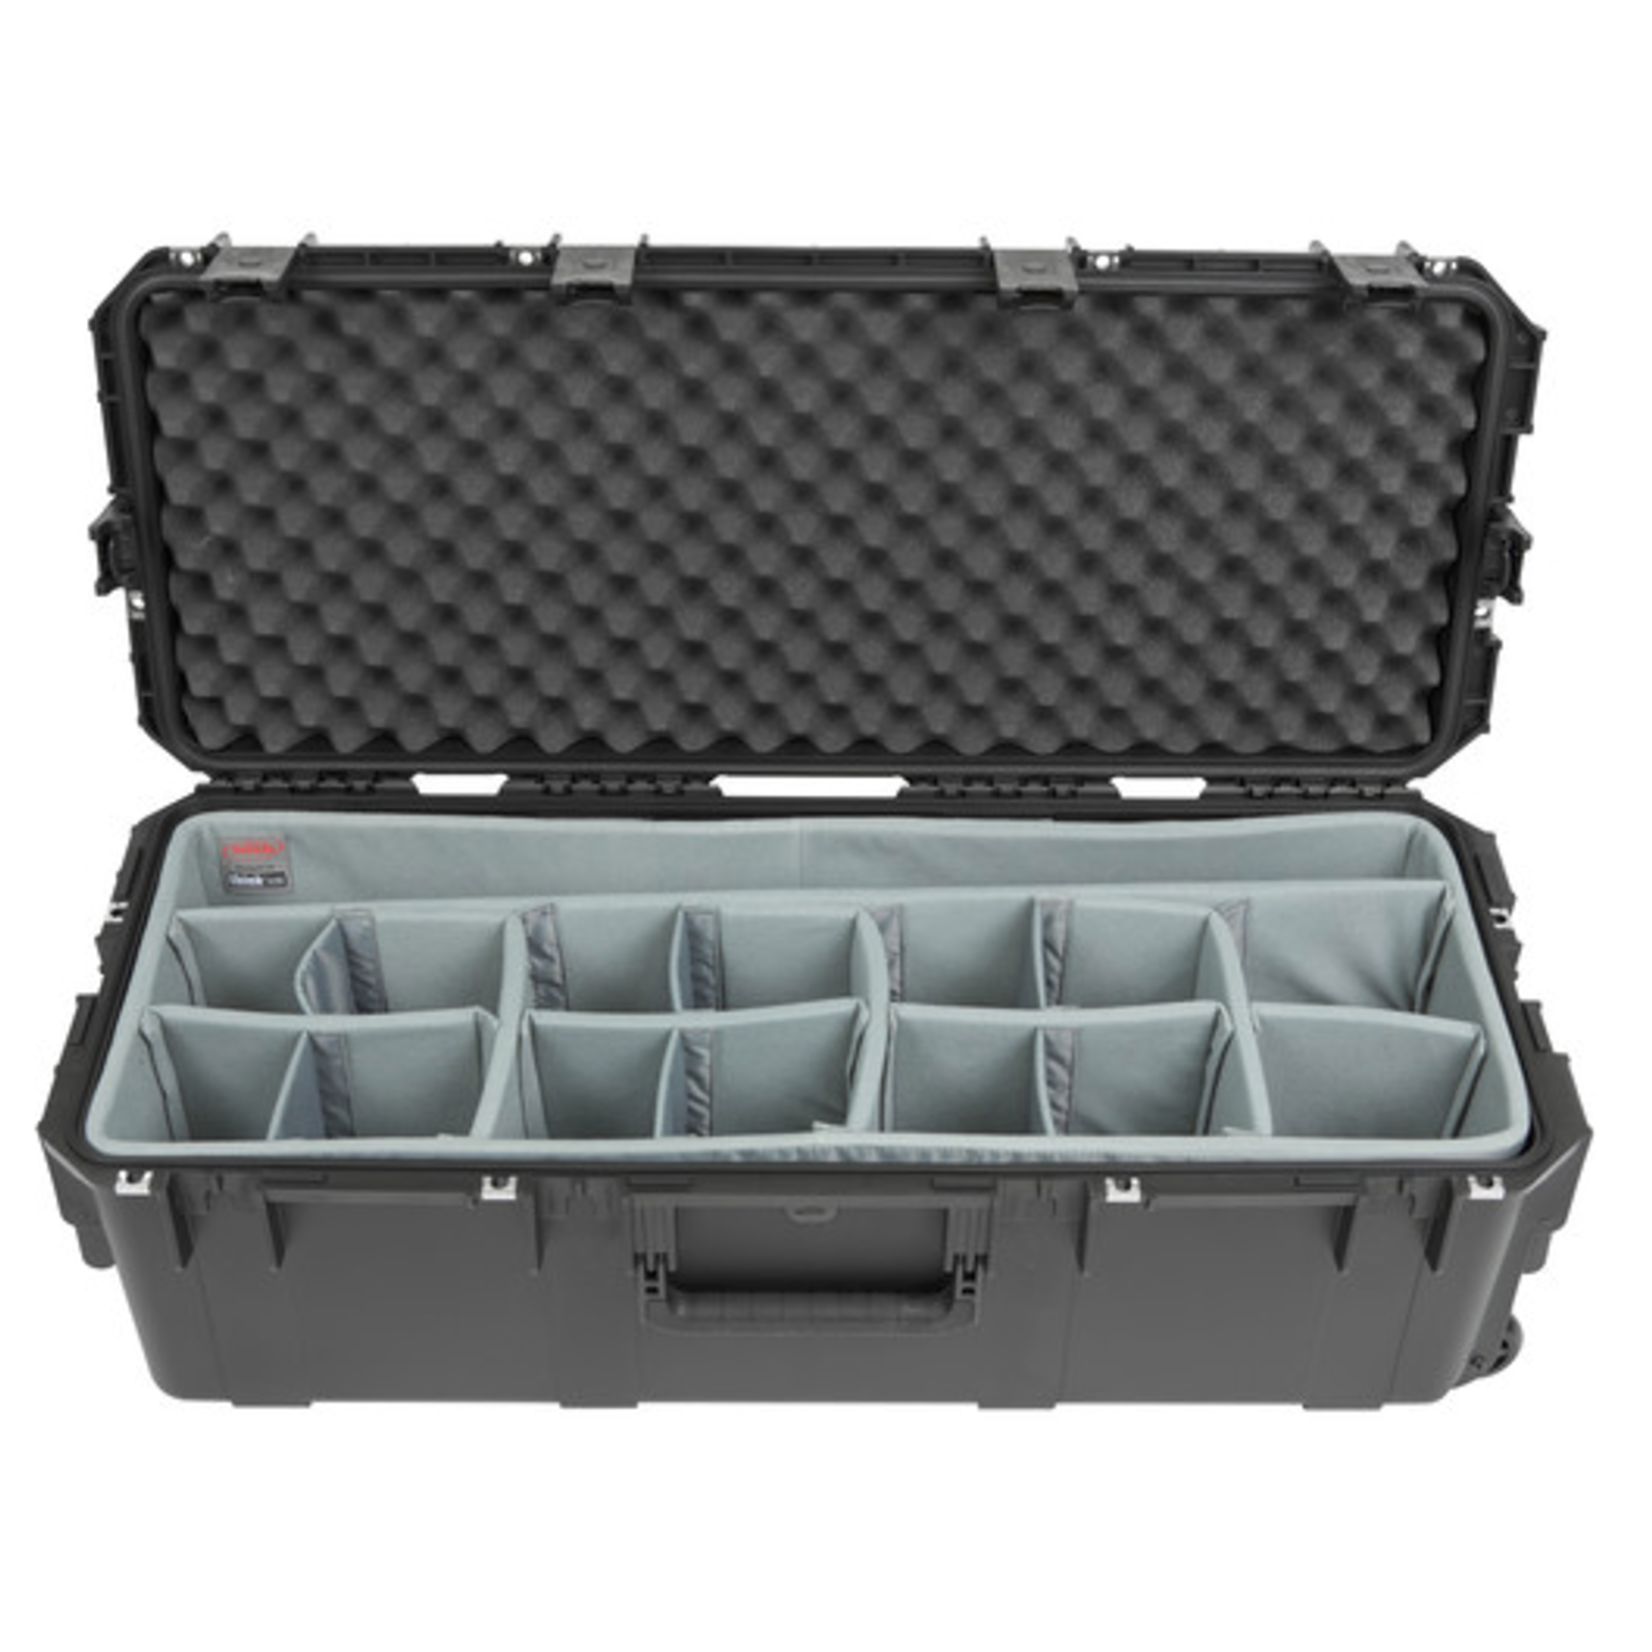 SKB Cases SKB iSeries 3613-12 Case with Think Tank Lighting/Stand Dividers & Lid Foam (Black)